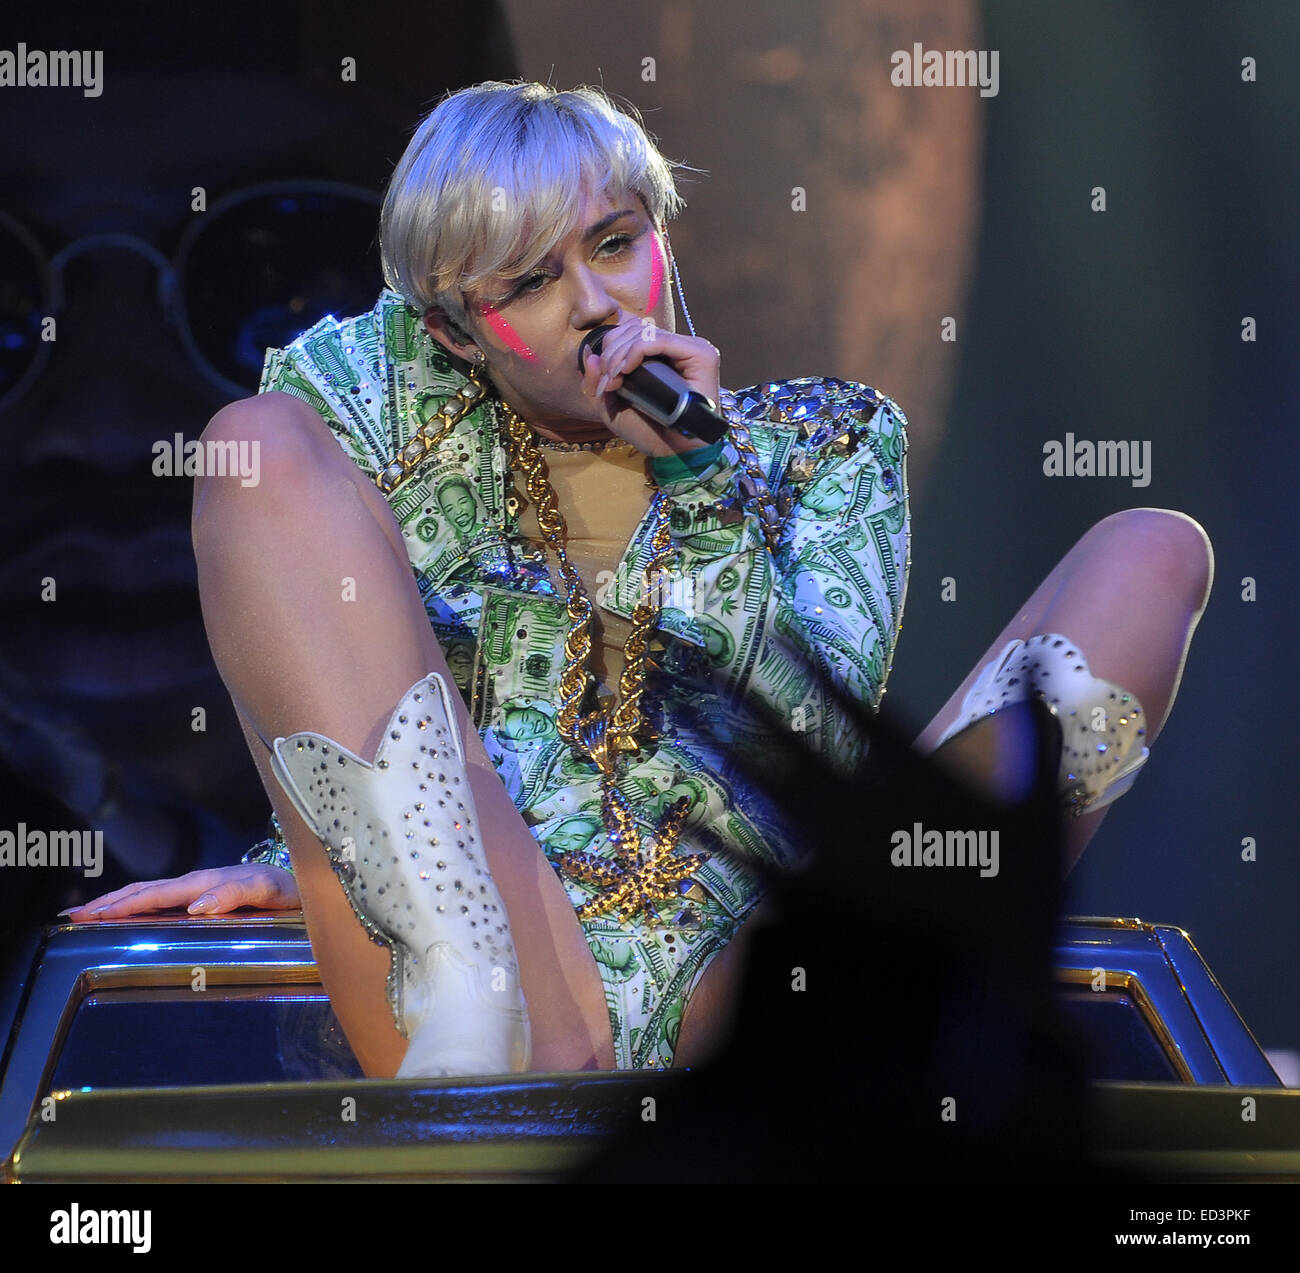 Miley Cyrus performs in a series of wacky outfits at the Ziggo Dome, for the final date of her European 'Bangerz' Tour. Miley spat water over her fans, and pretended to smoke a giant cardboard joint, given to her by someone in the crowd  Featuring: Miley Stock Photo